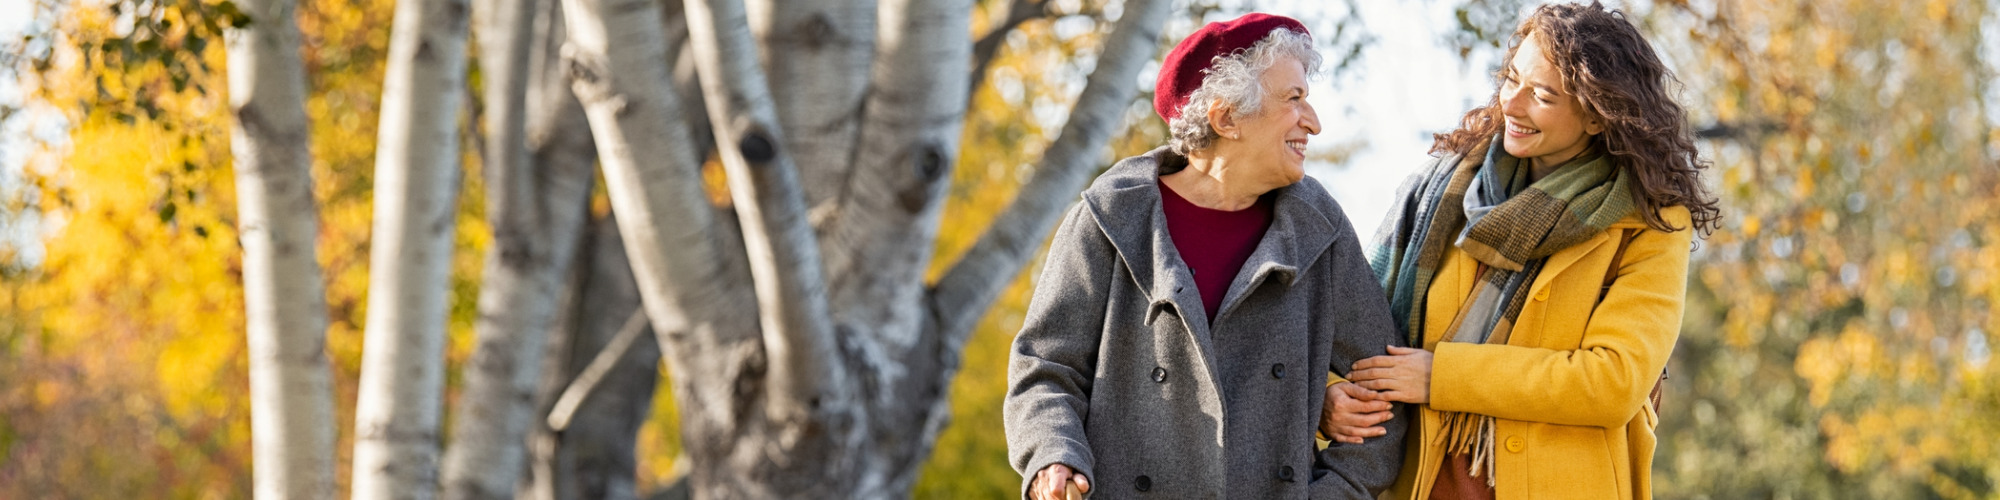 Benefits for Elderly Clients - The Latest Guidance